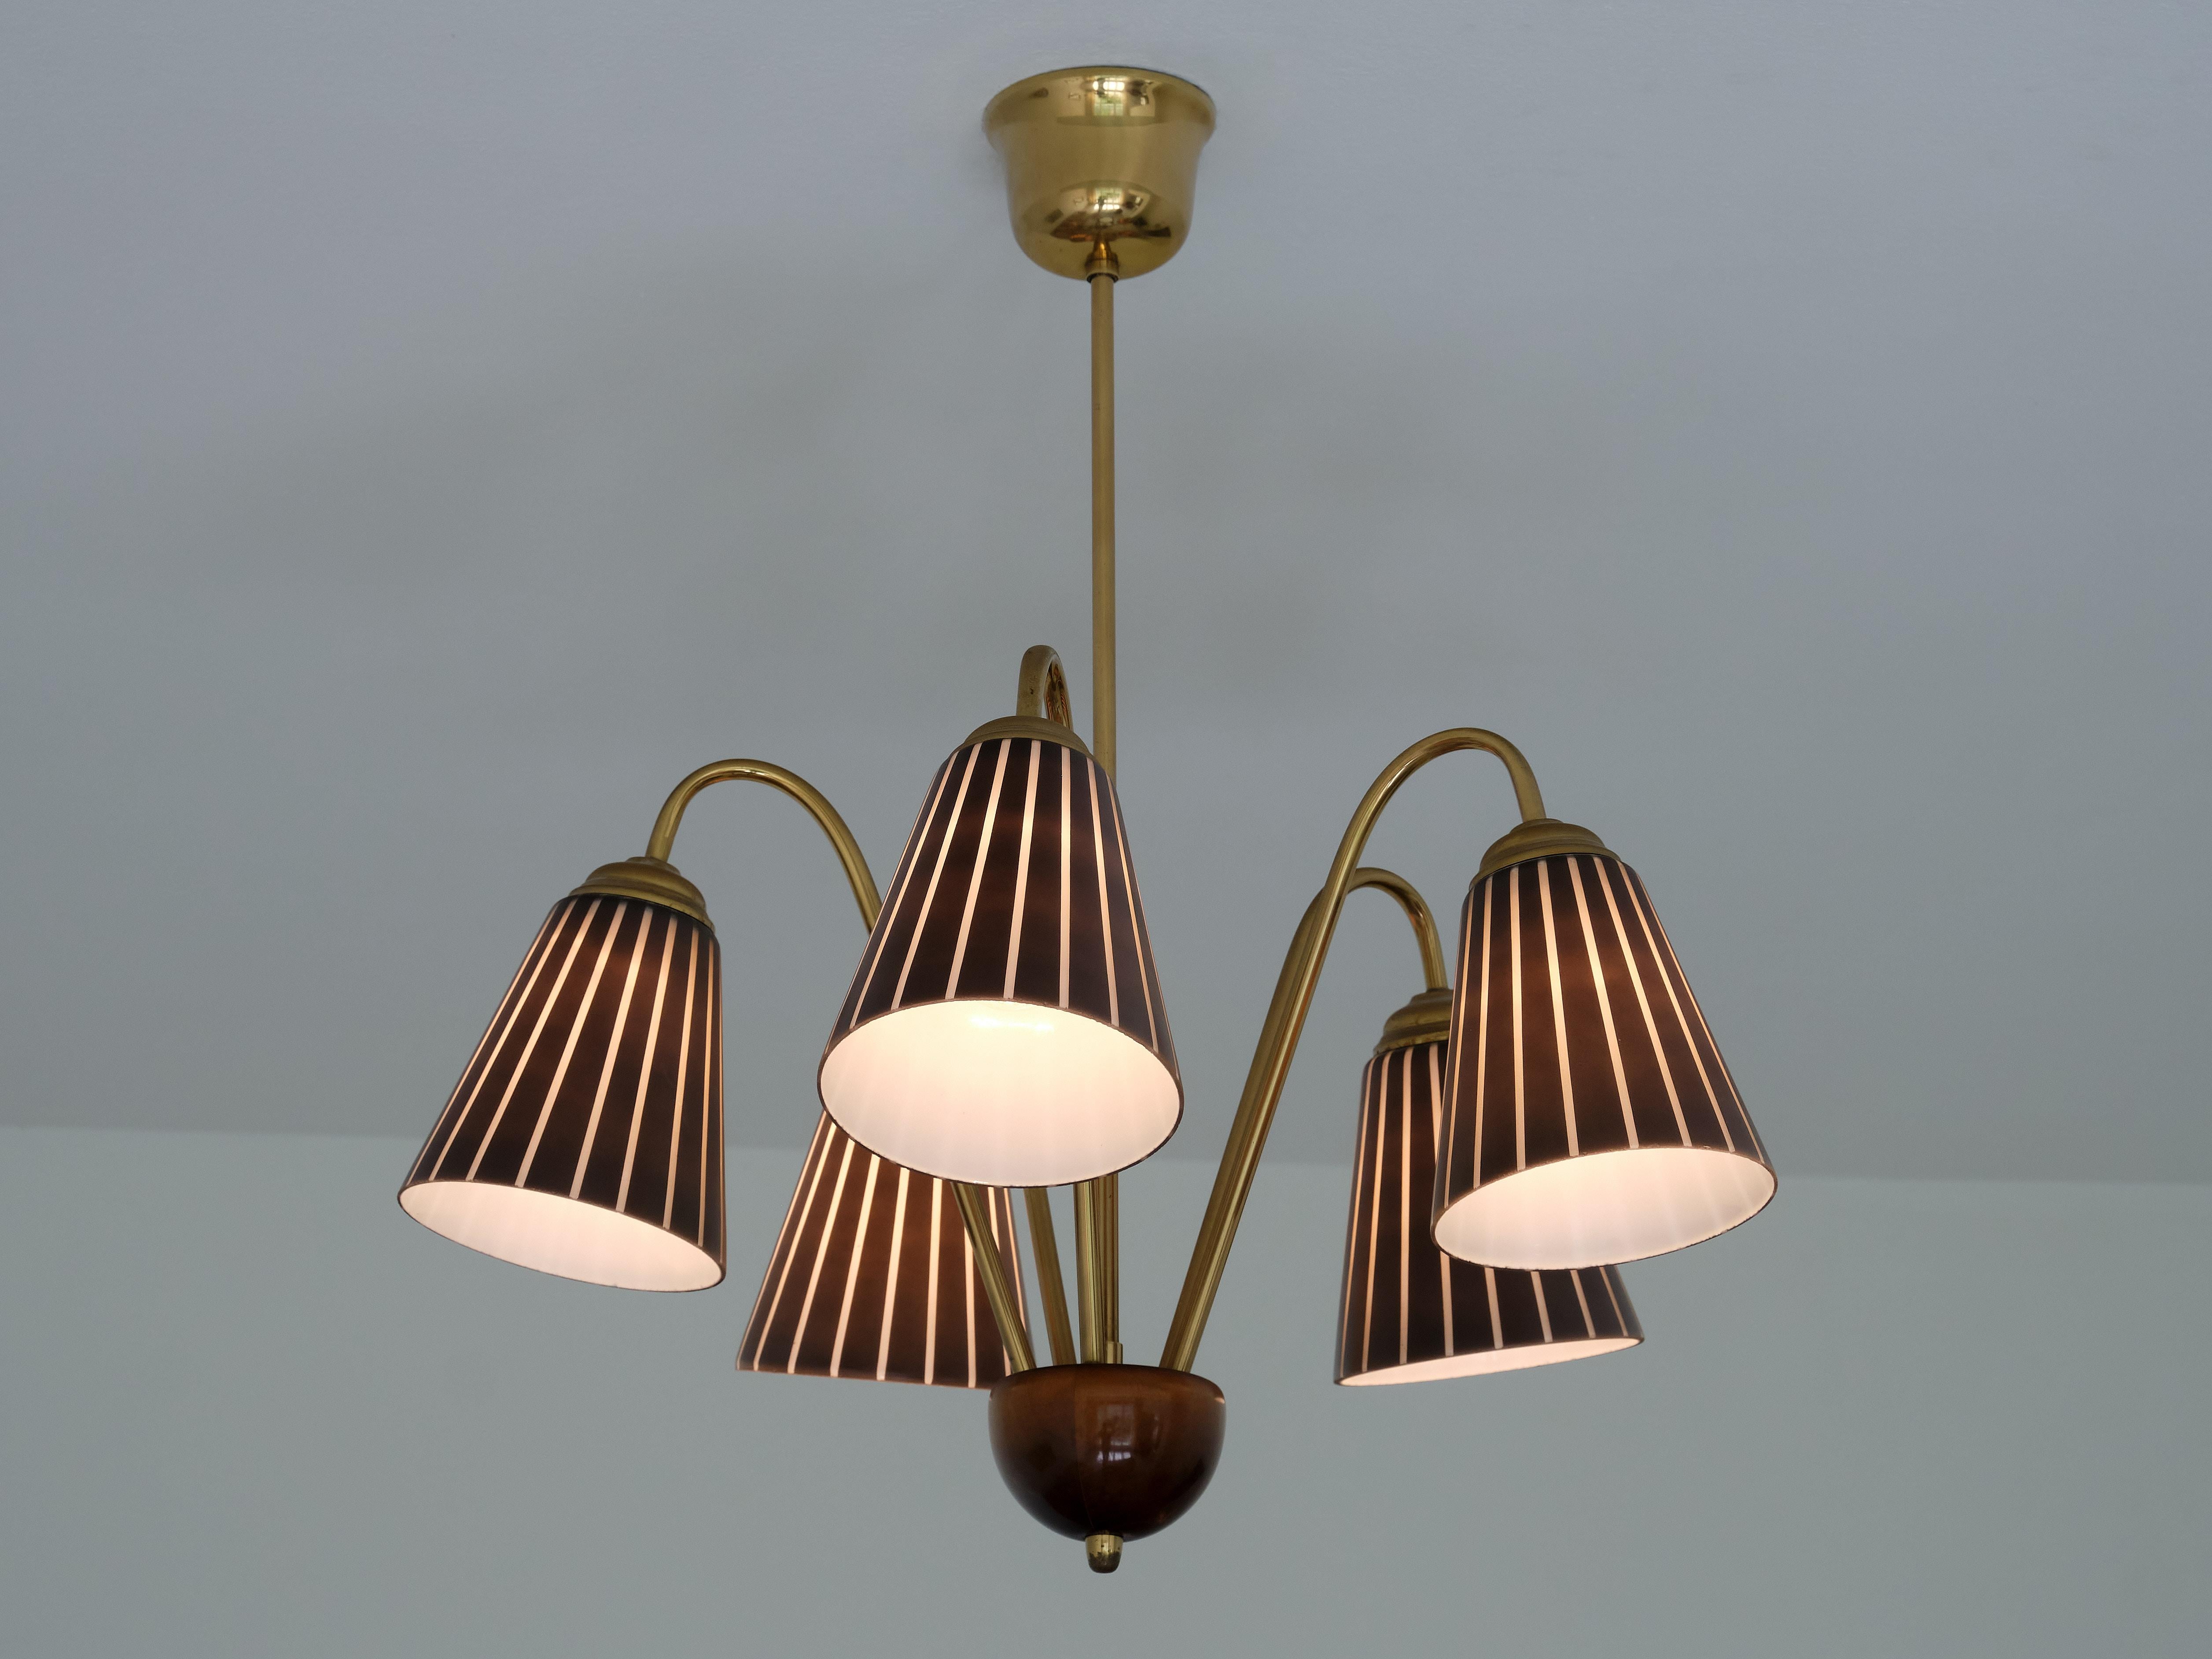 Nils Landberg Attributed Five Arm Chandelier in Striped Glass & Brass, Orrefors 1